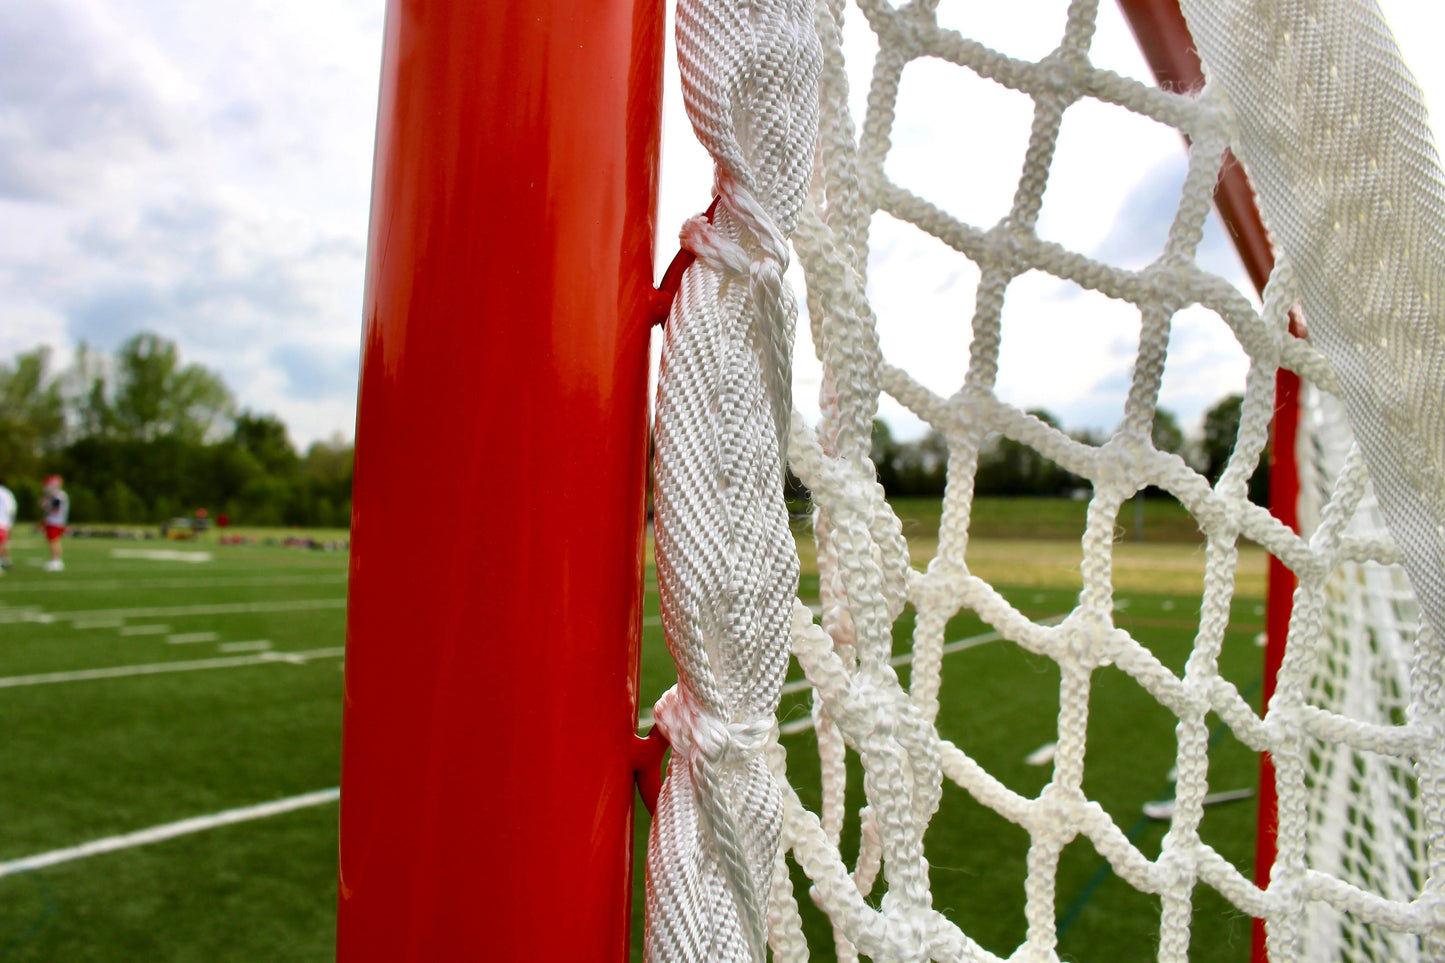 High School Practice Goal FRAME ONLY - 50 lbs, 6'x6'x7', Posts w/ Lacing Rails by Crankshooter® Free Shipping - #1 Selling Goal